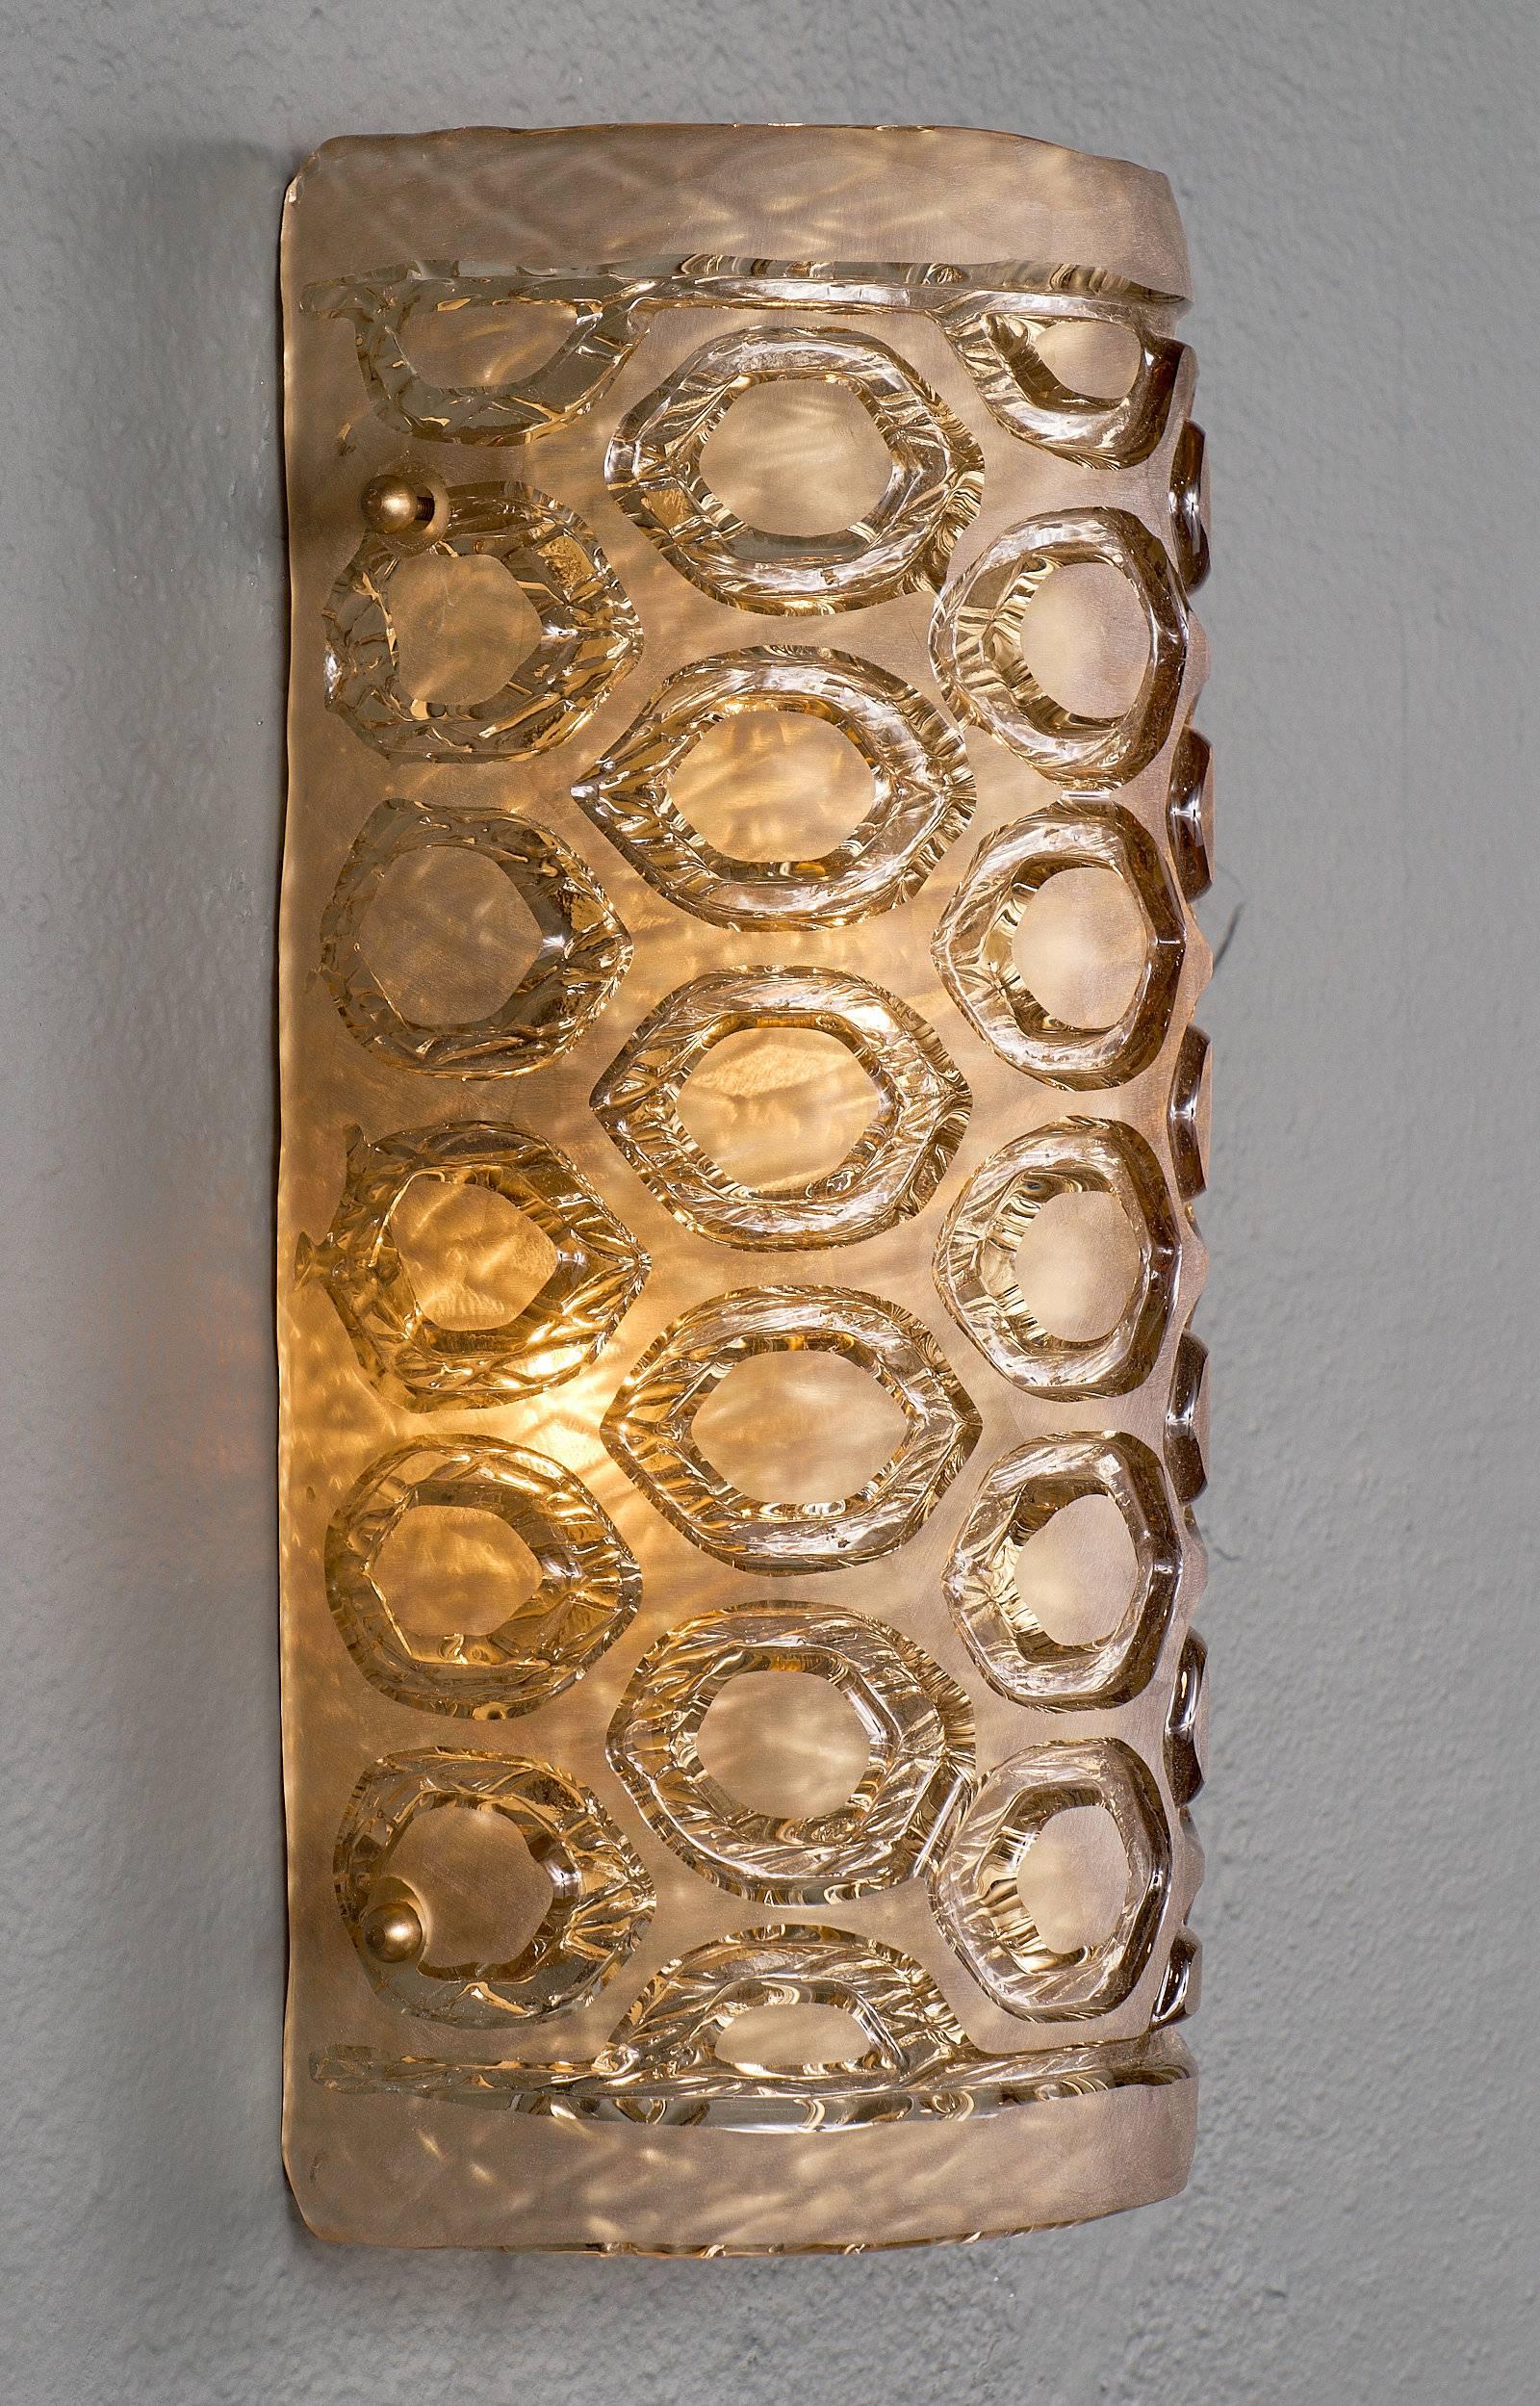 A pair of Murano glass sconces of frosted glass with a geometric stamped pattern. We love the size and dynamic curve of this pair. Each sconce requires two medium-base bulbs up to 60 watts each. Wired to meet US standards.

This pair is currently